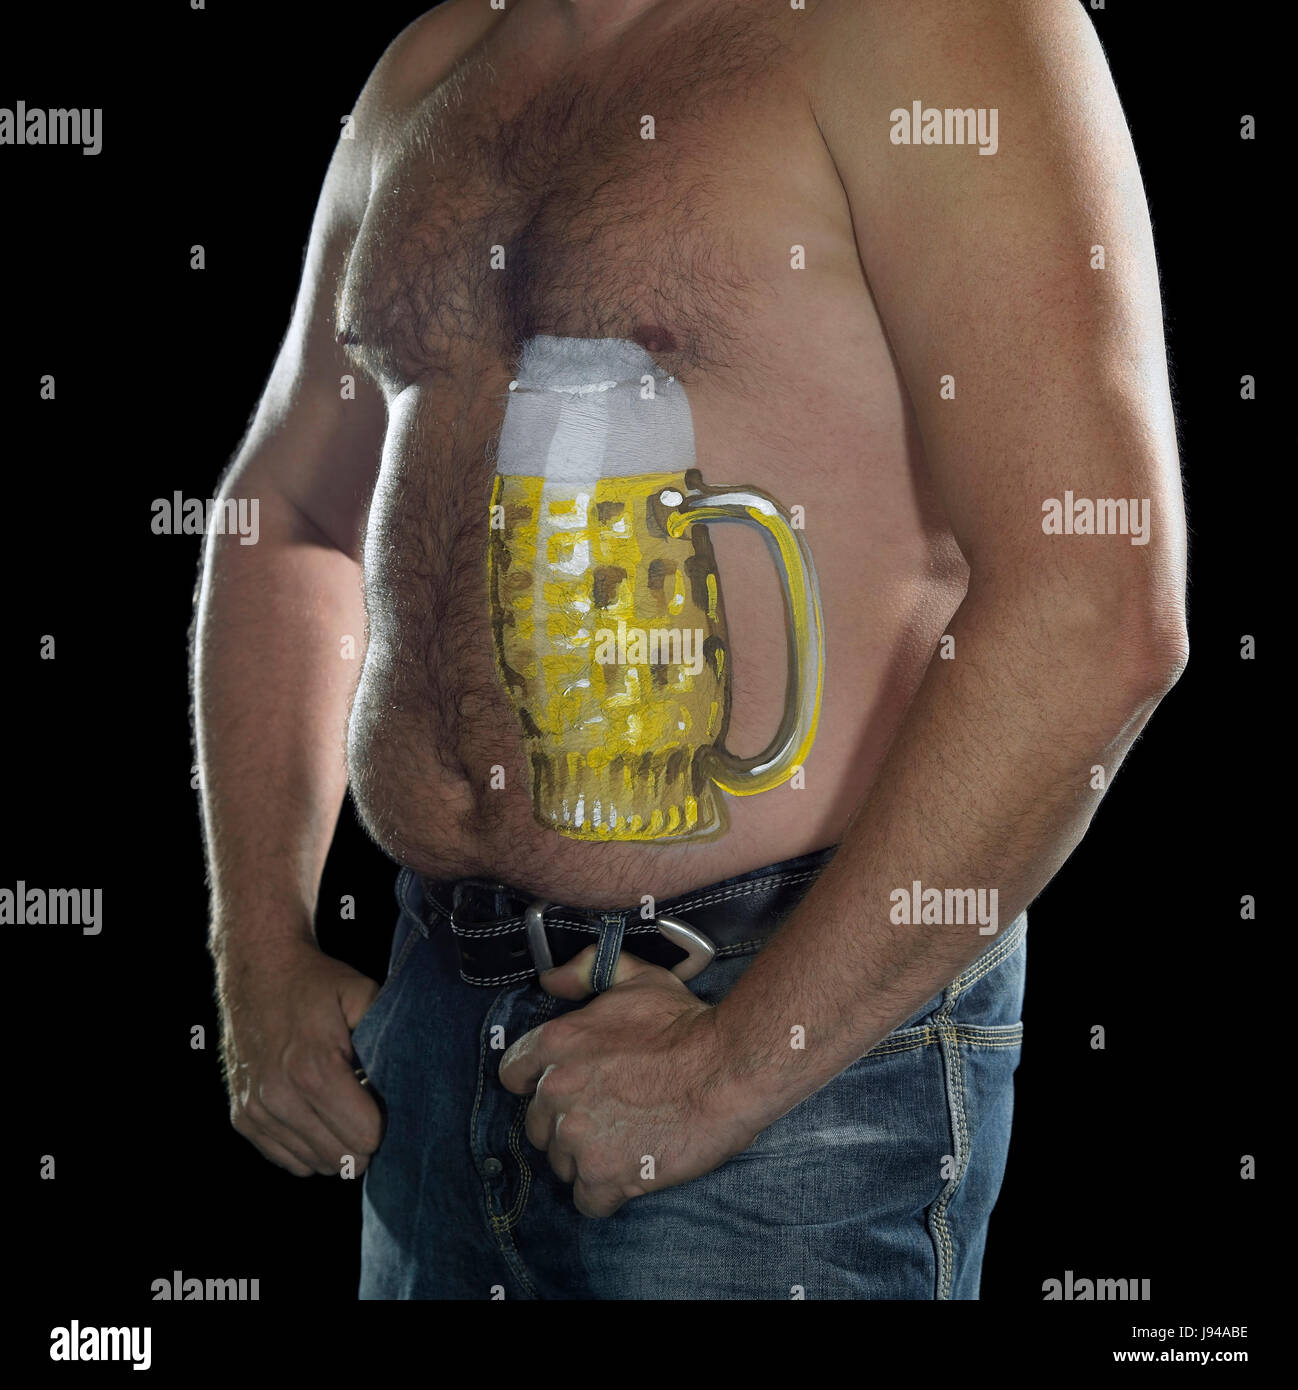 well being, well-being, skin, bellybutton, beer belly, humans, human beings, Stock Photo